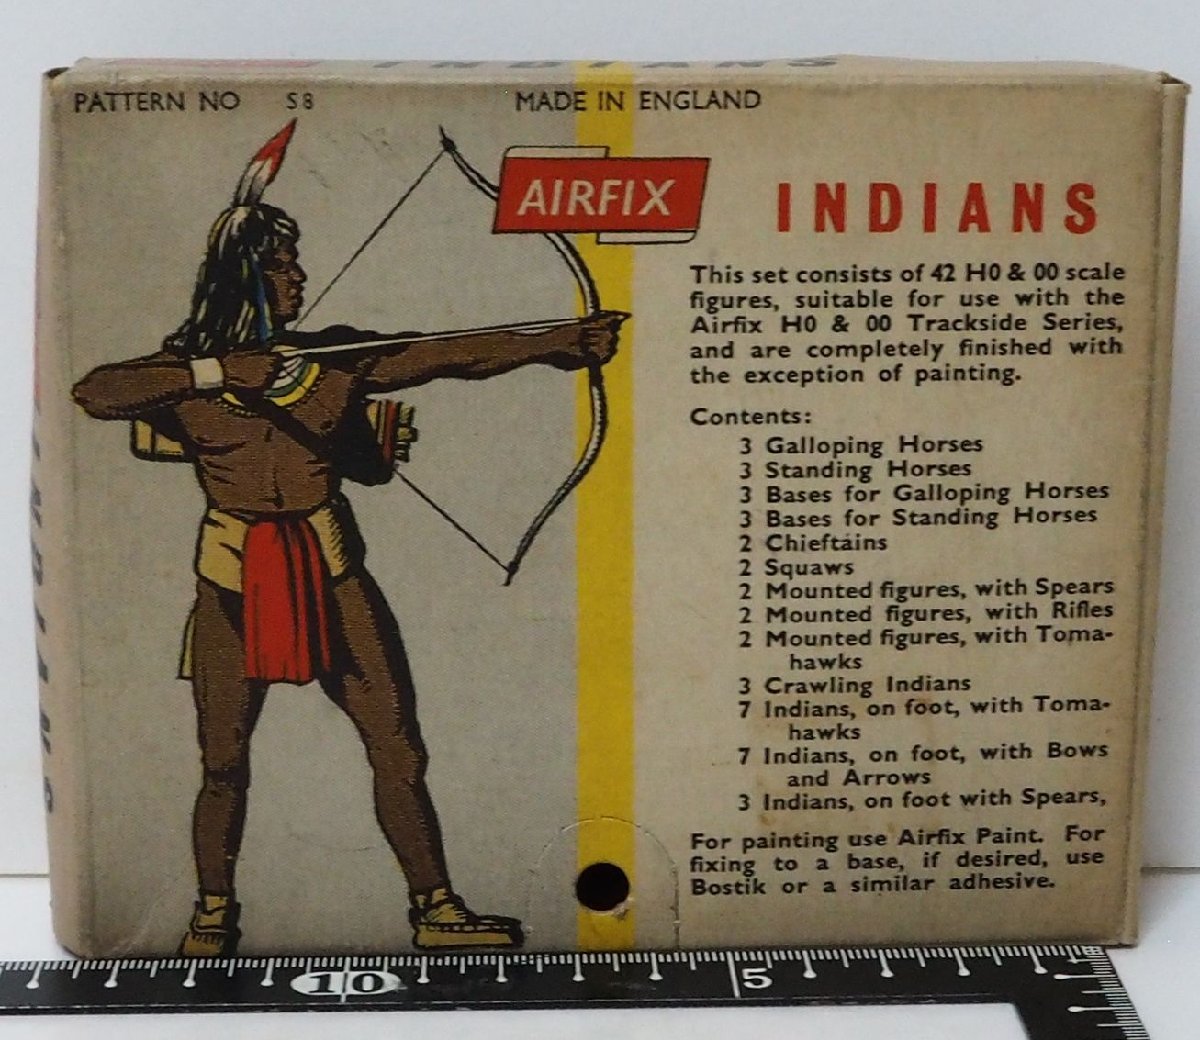 AIRFIX[INDIANS HO & OO SCALE FIGURES] model plastic model Indian Native American n# air fixing parts [ box attaching ]0823